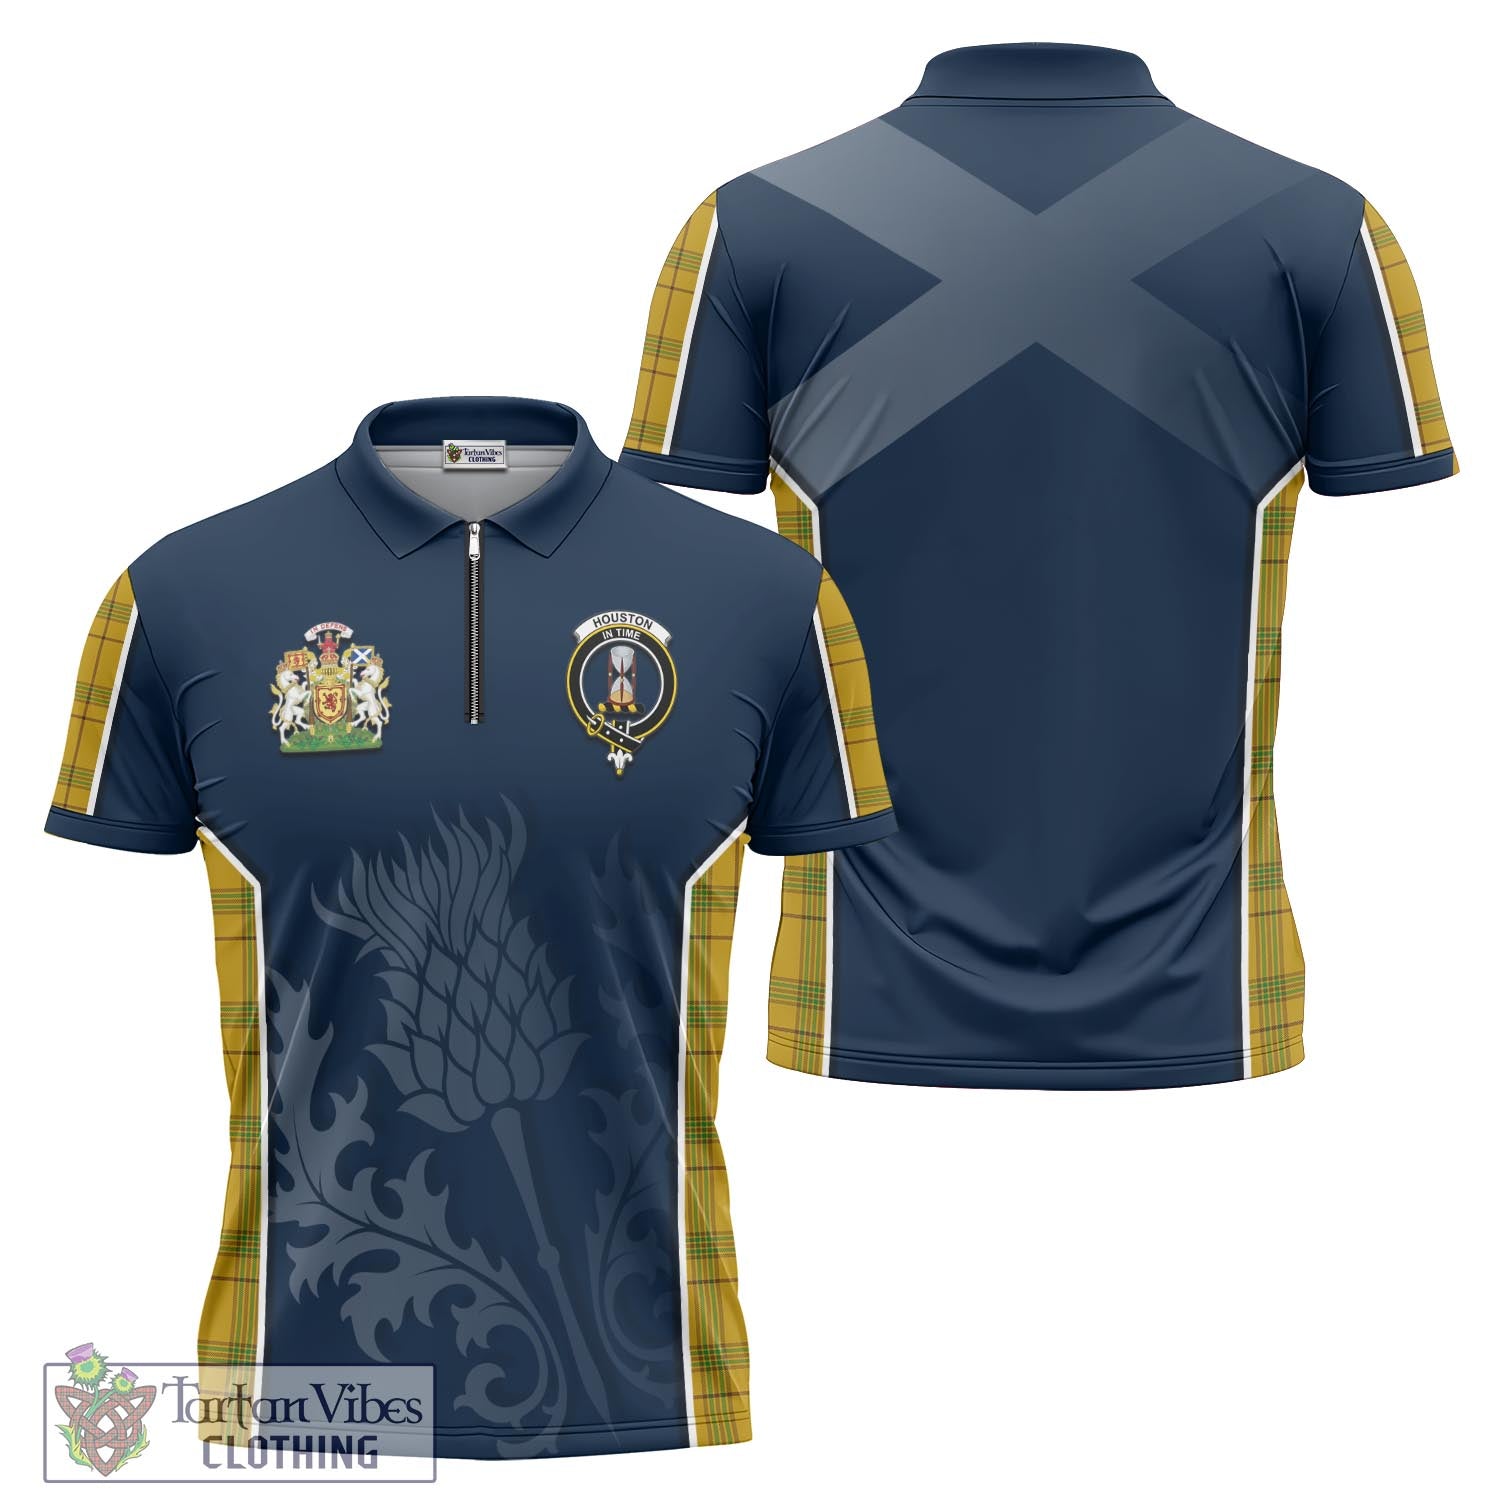 Tartan Vibes Clothing Houston Tartan Zipper Polo Shirt with Family Crest and Scottish Thistle Vibes Sport Style